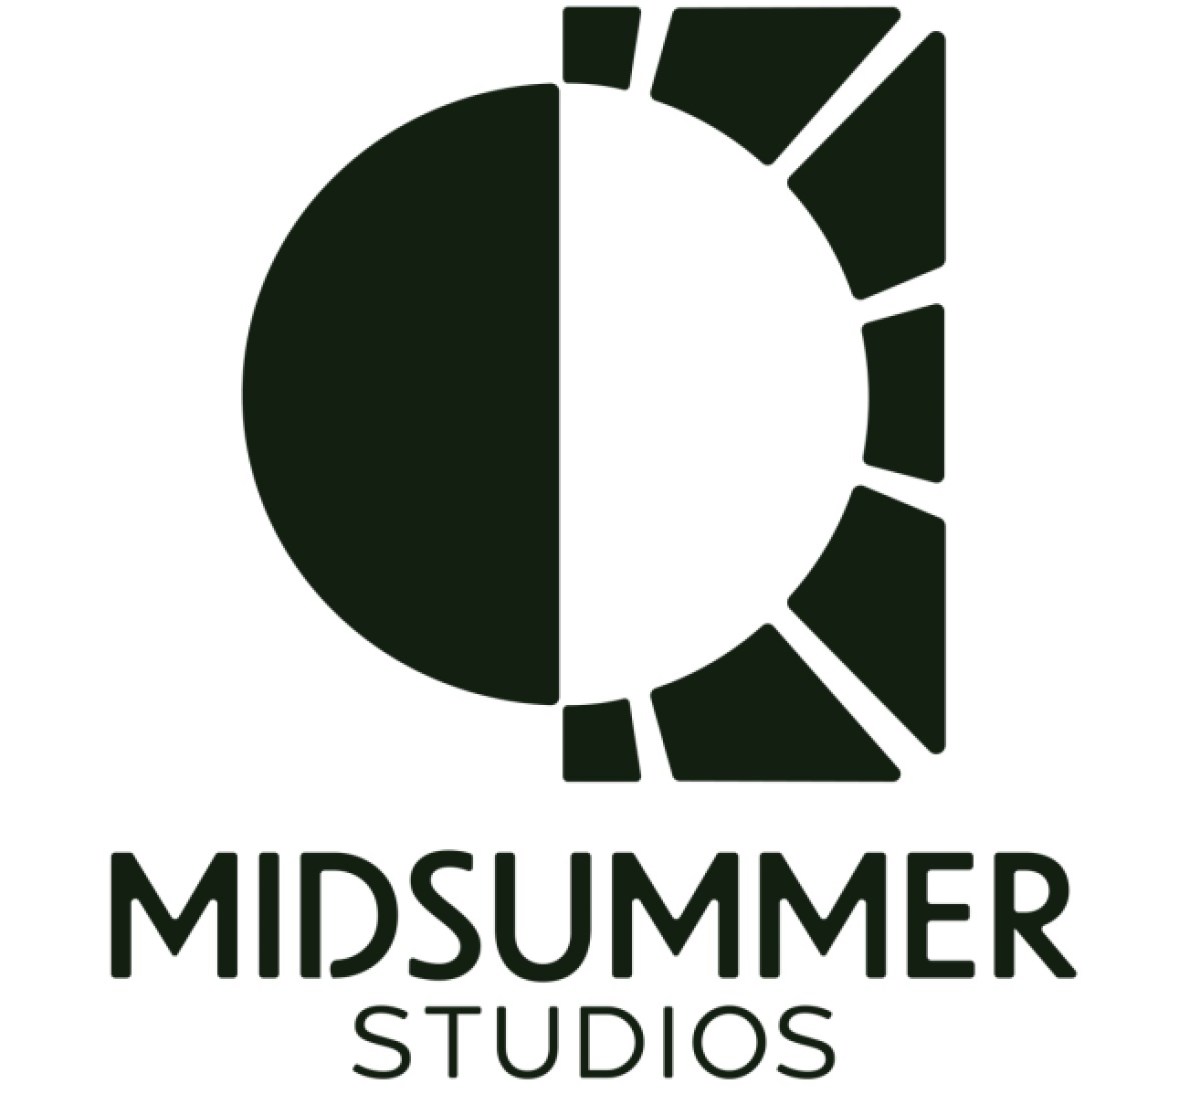 Ex-XCOM and The Sims devs launch Midsummer Studios to reinvent life sims